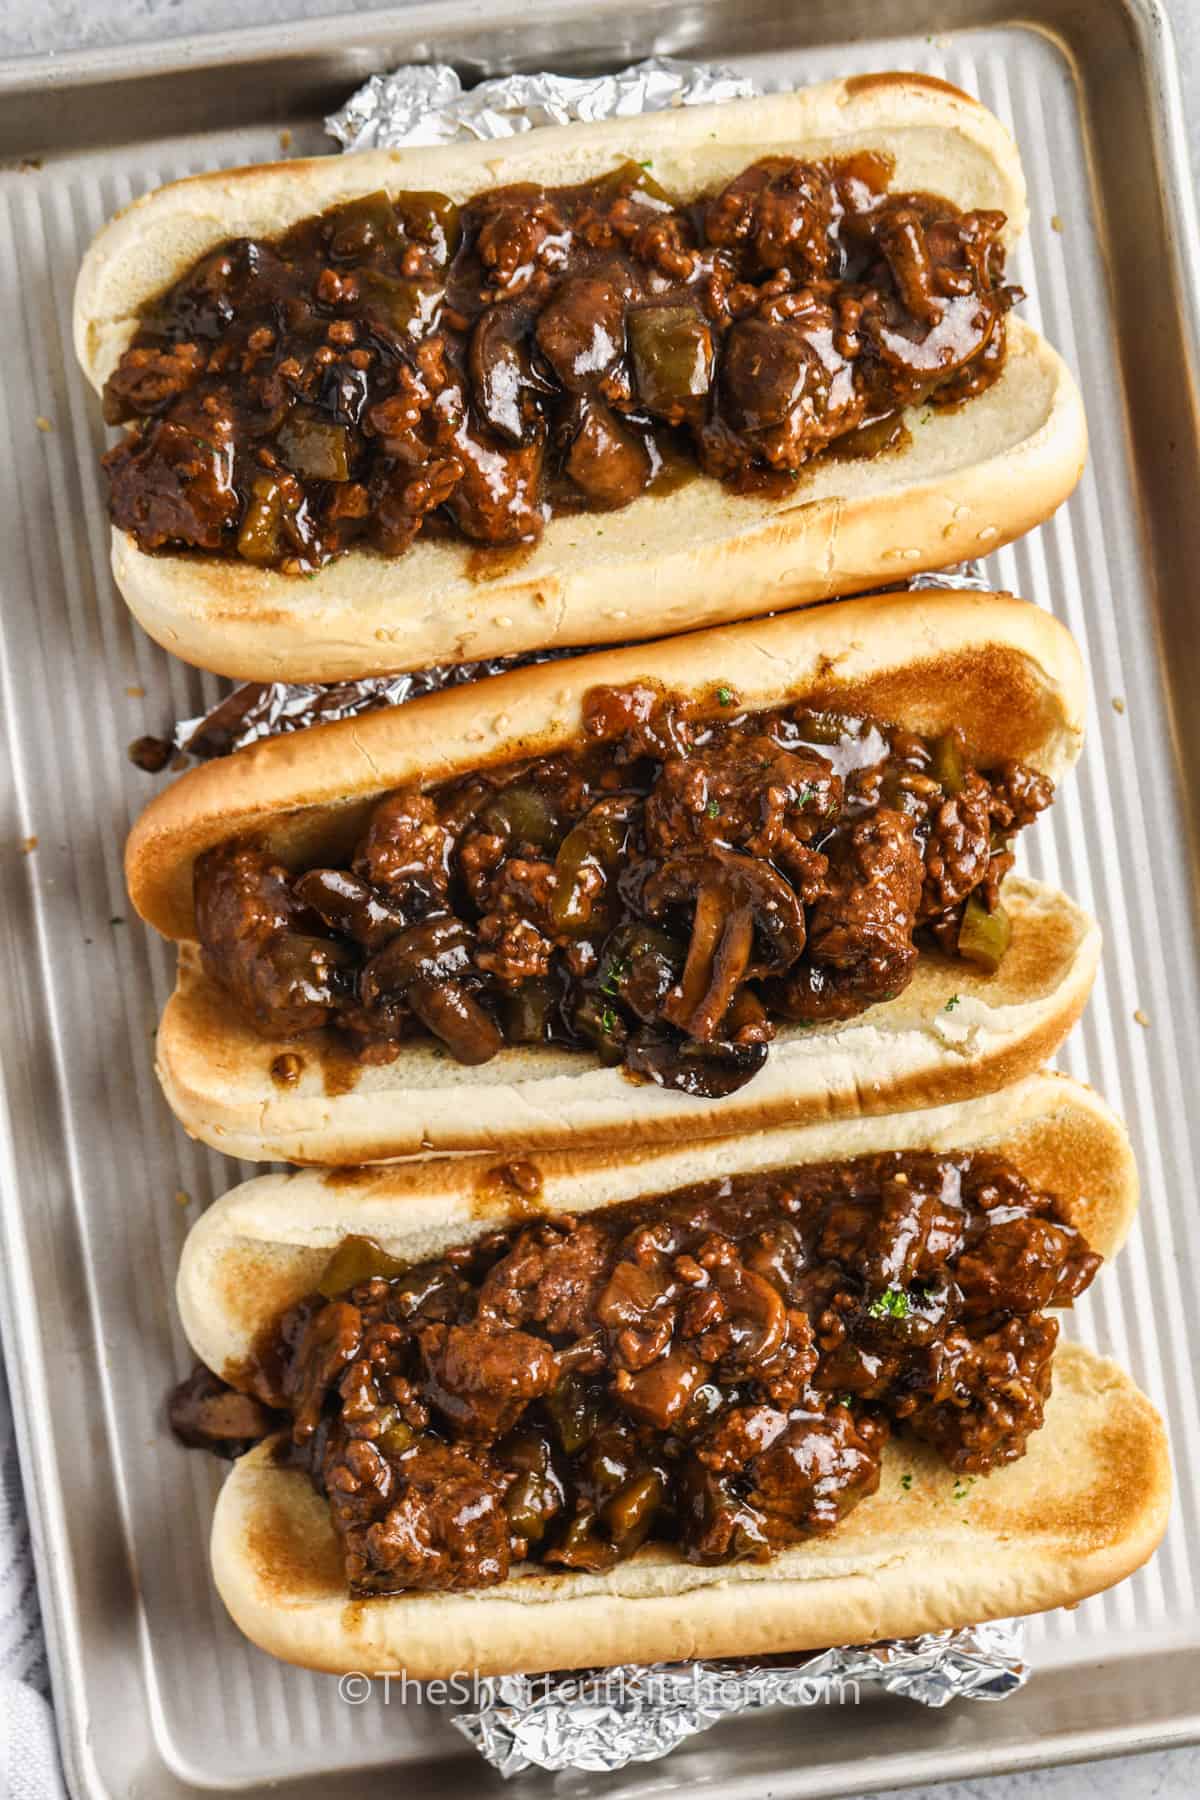 Crock Pot Beef And Gravy on buns